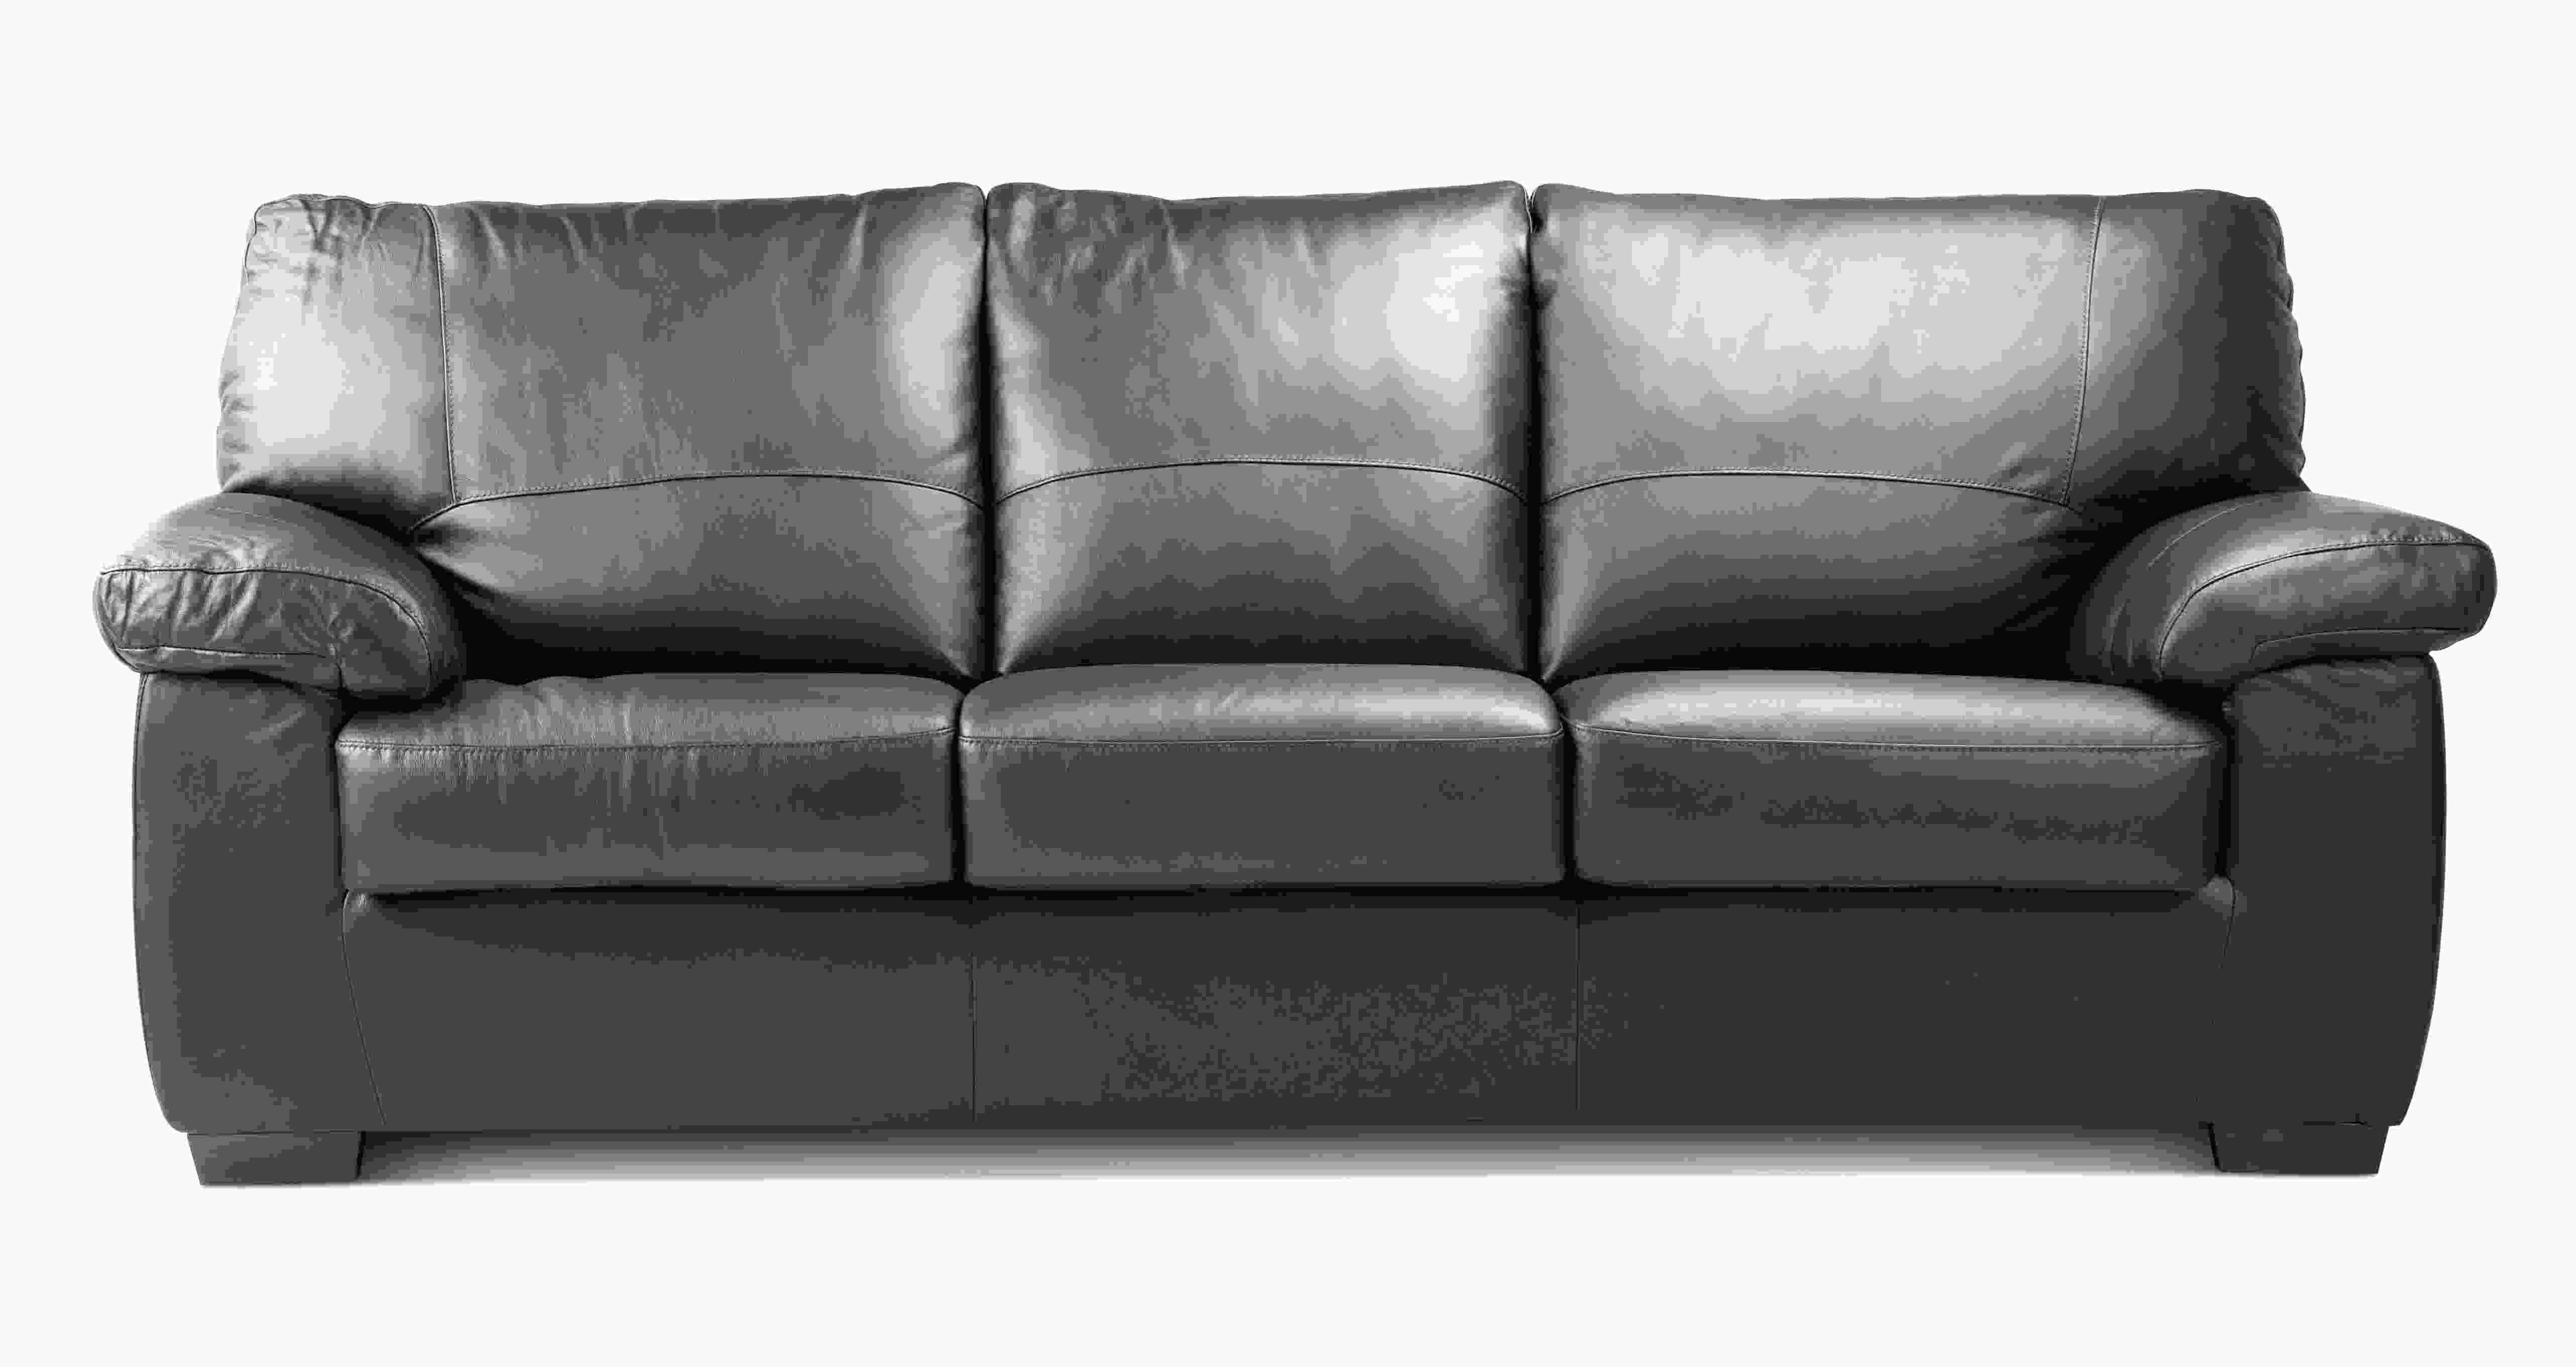 dfs brown leather sofa for sale